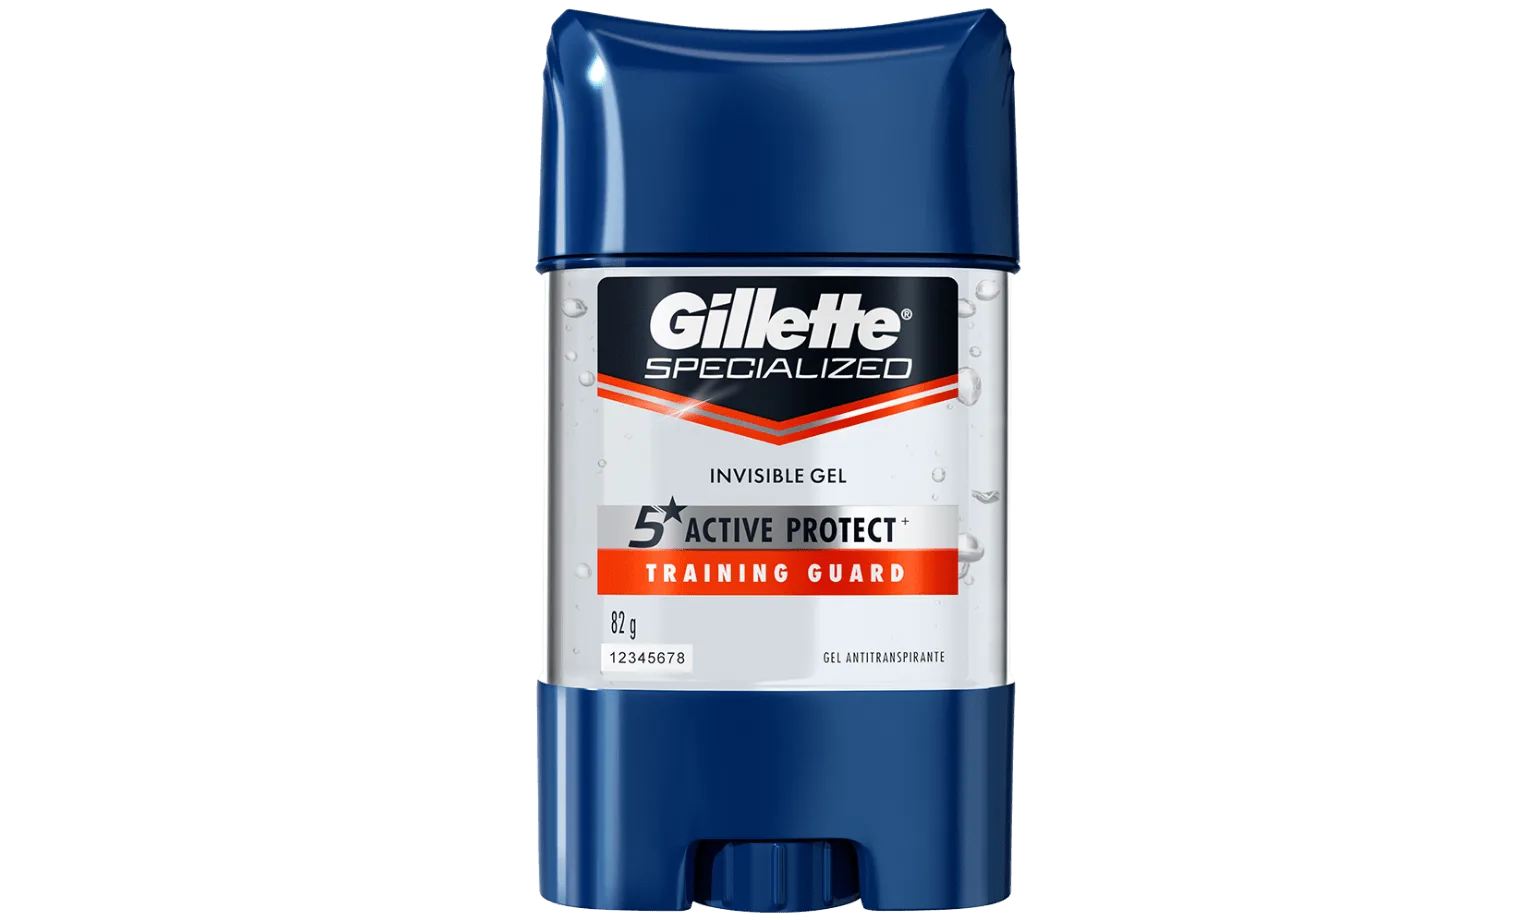 Gillette Specialized Gel Invisible Training Guard